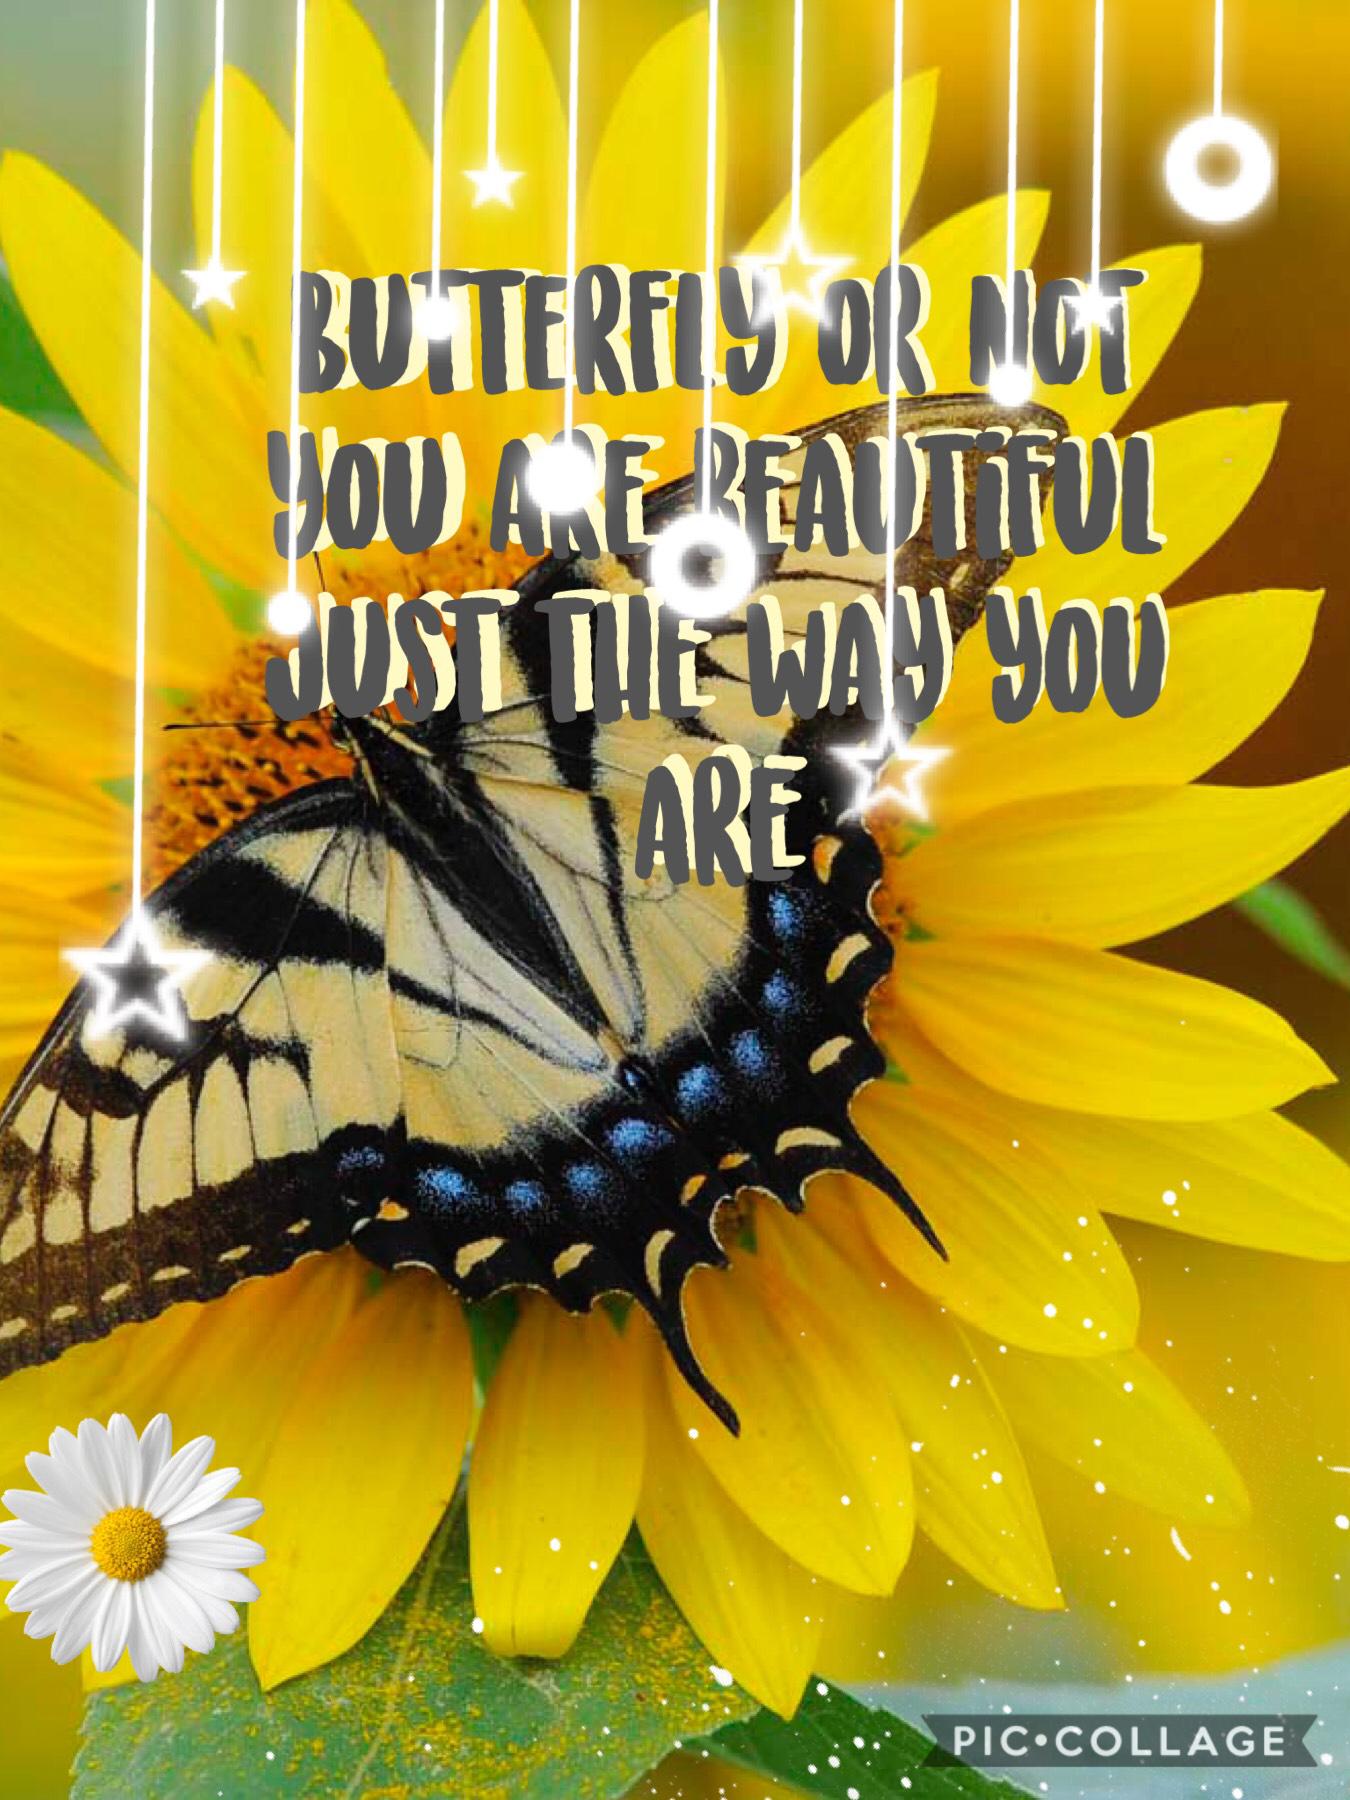 🌻🦋You are beautiful!🦋🌻